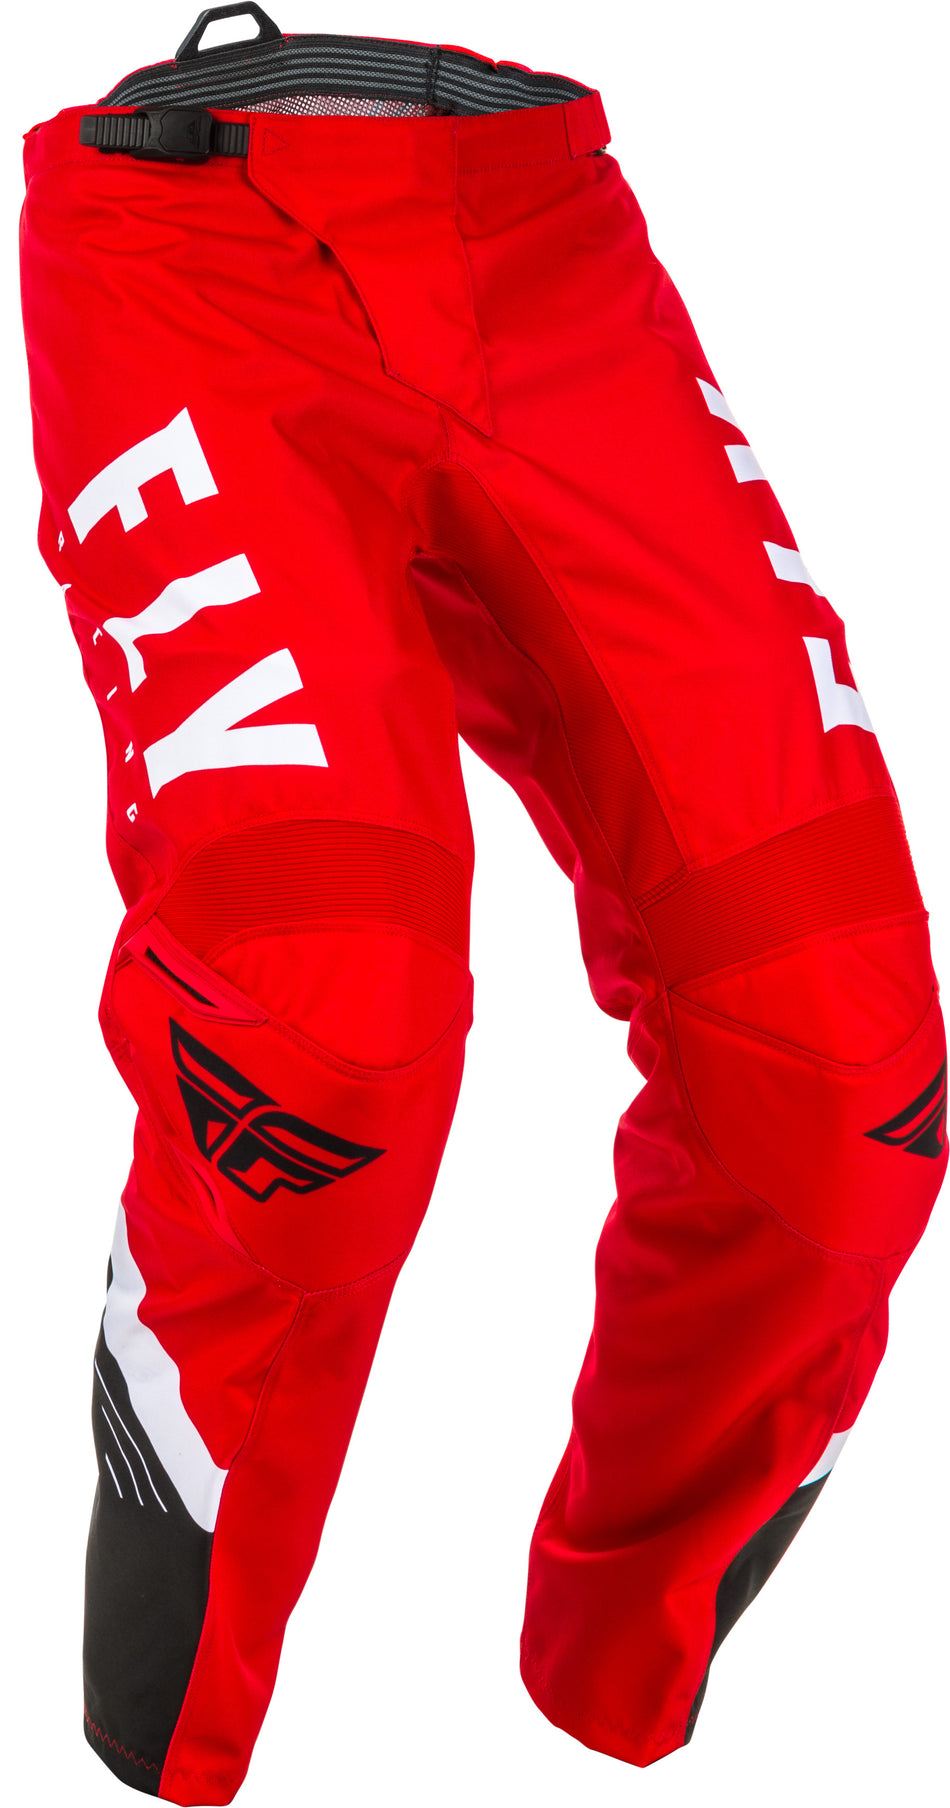 FLY RACING F-16 Pants Red/Black/White Sz 32 373-93332